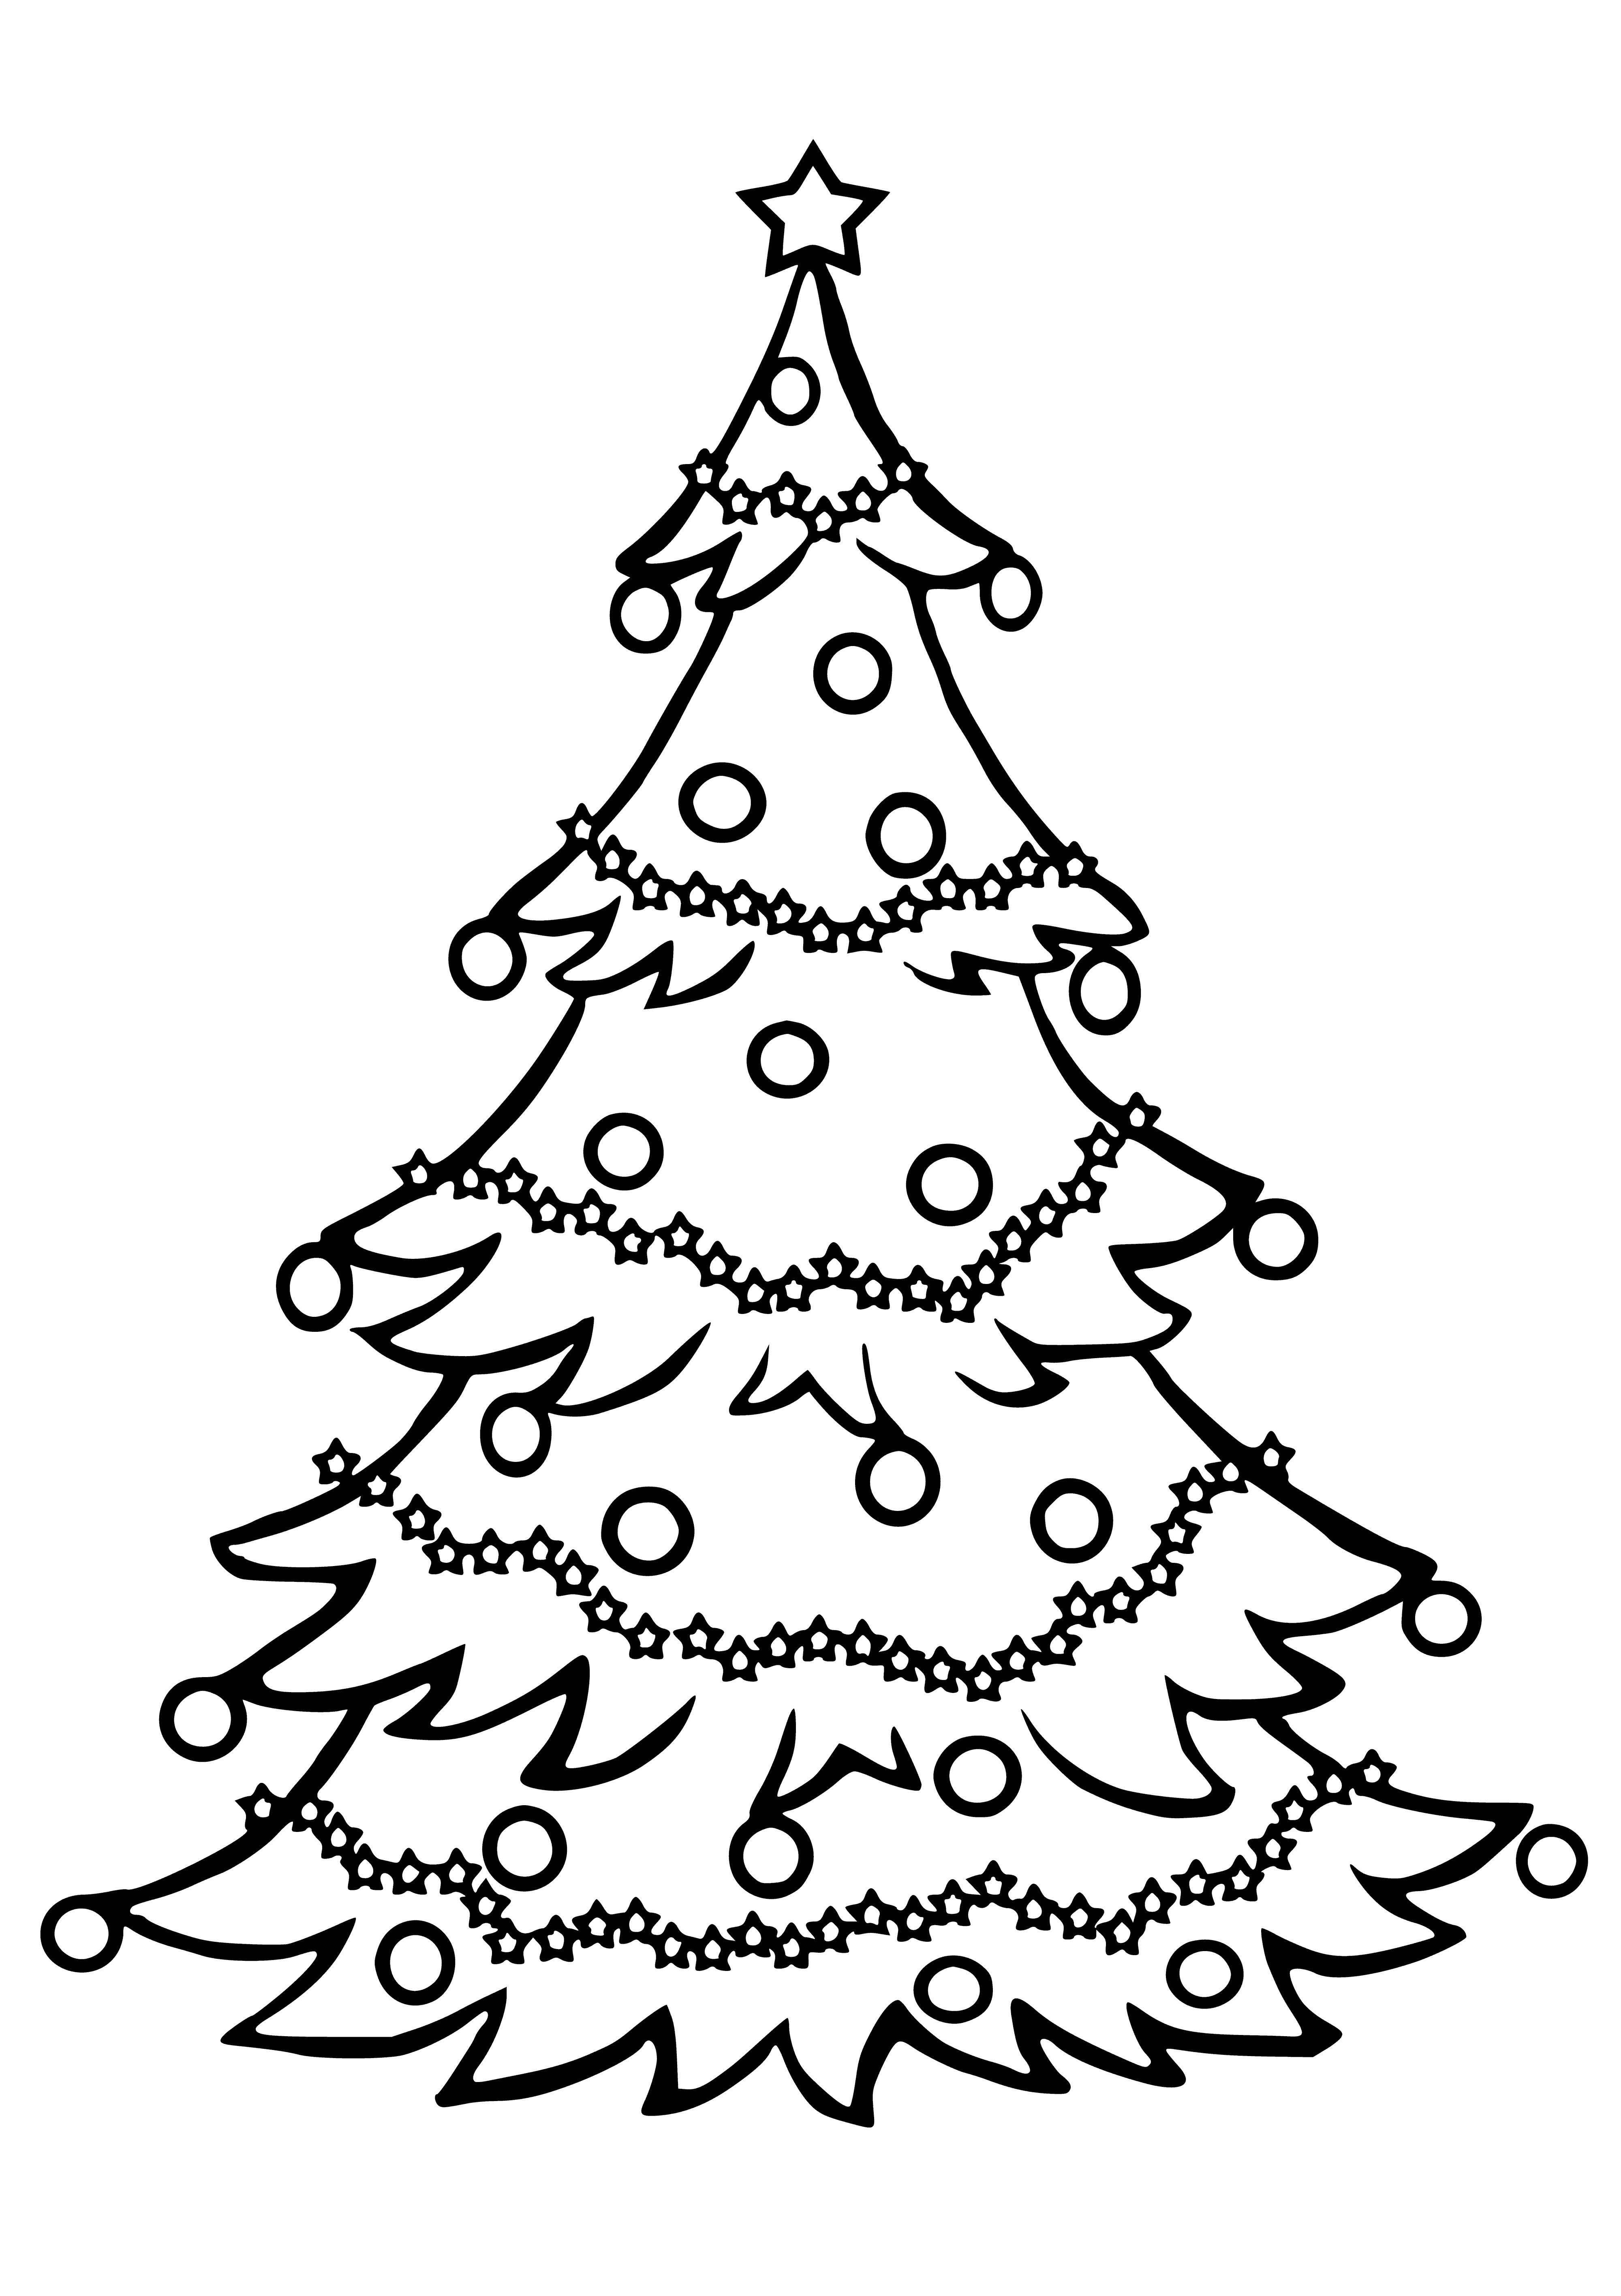 coloring page: Christmas tree lit up with colorful lights and presents underneath.